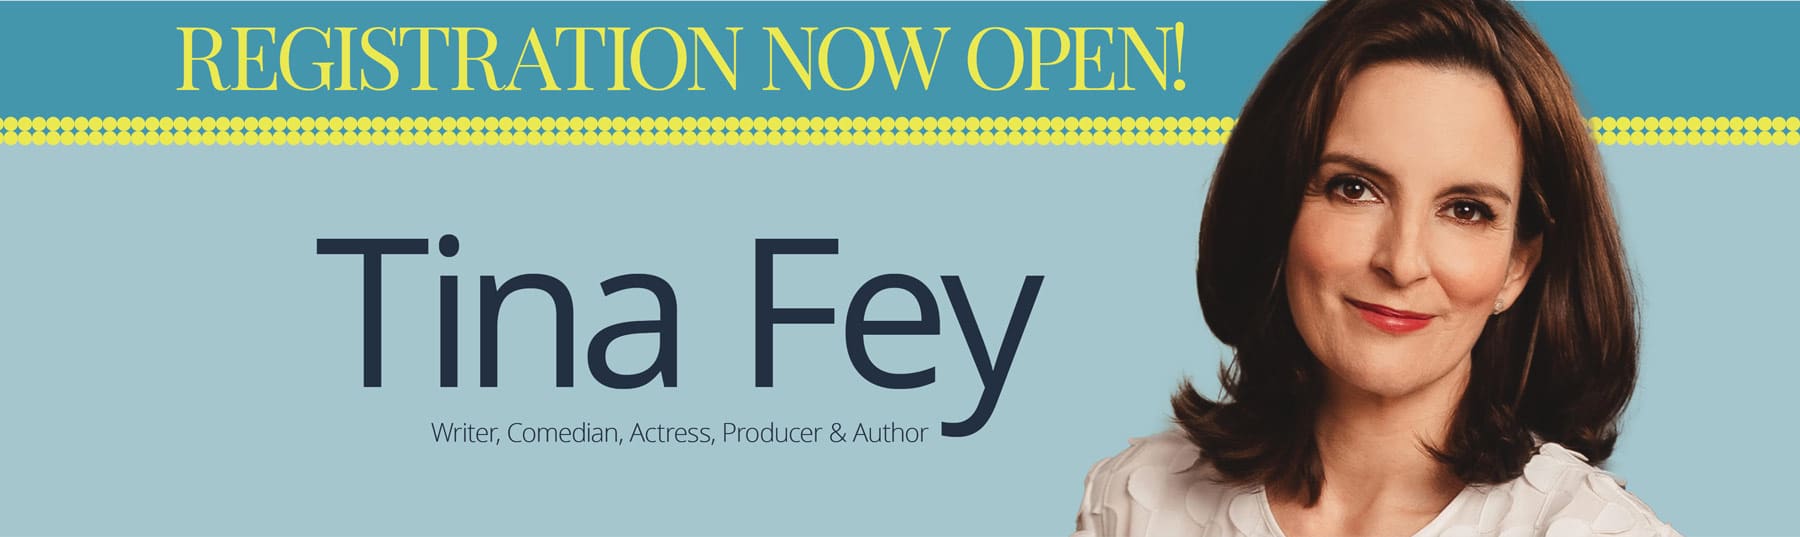 Registration is now open! Join Tina Fey and other amazing speakers in person this October 19, 2023!